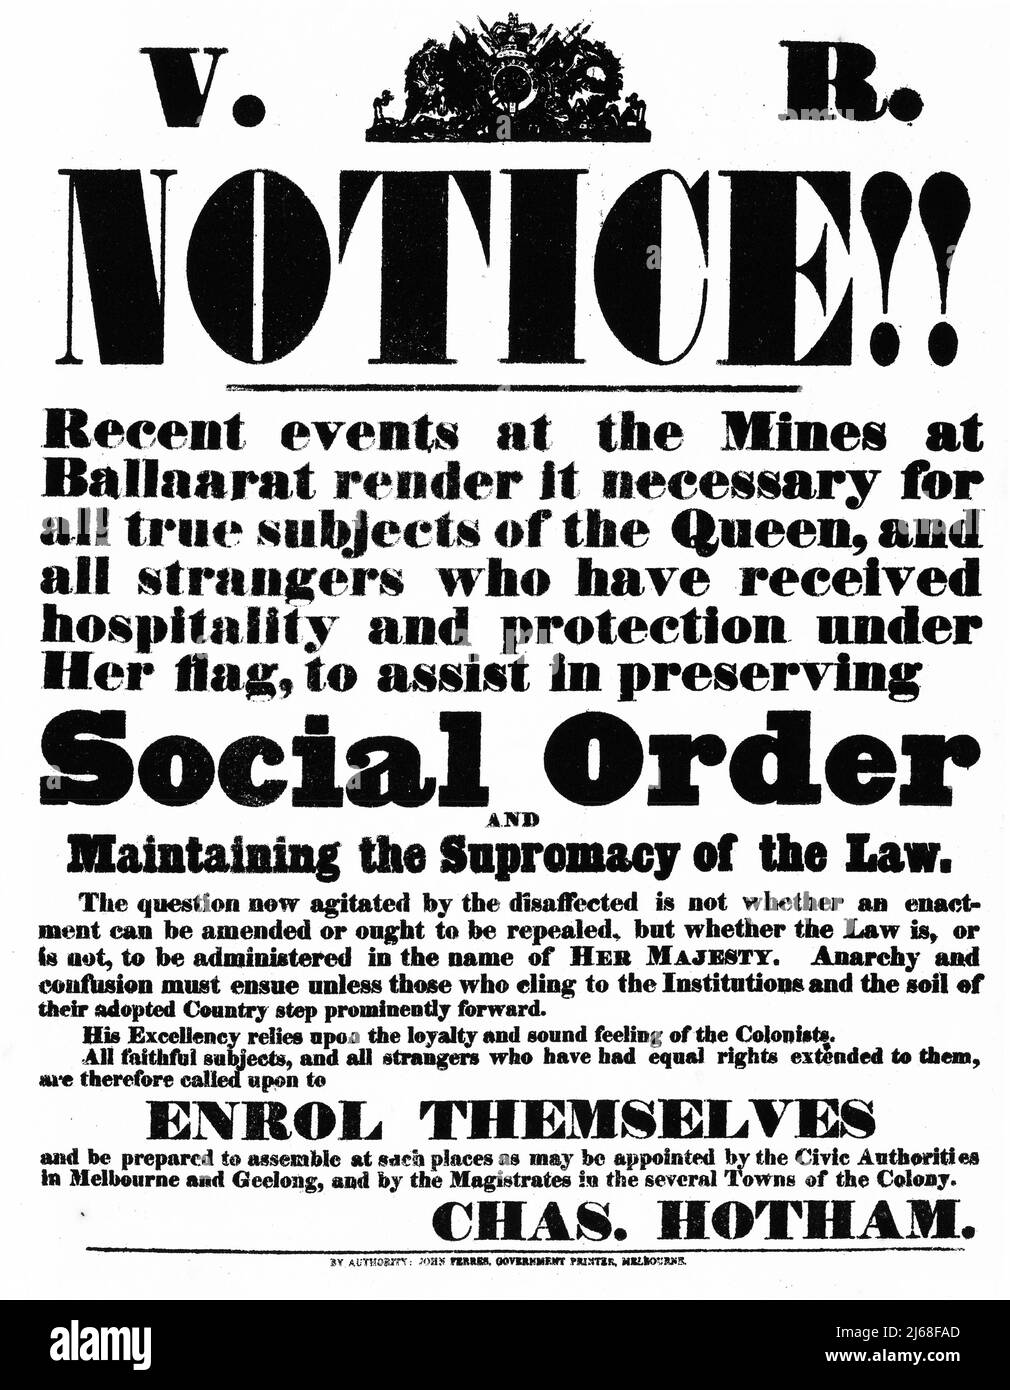 A notice issued to quell the rebellion of gold miners in VIctoria, Australia, 1854 Stock Photo